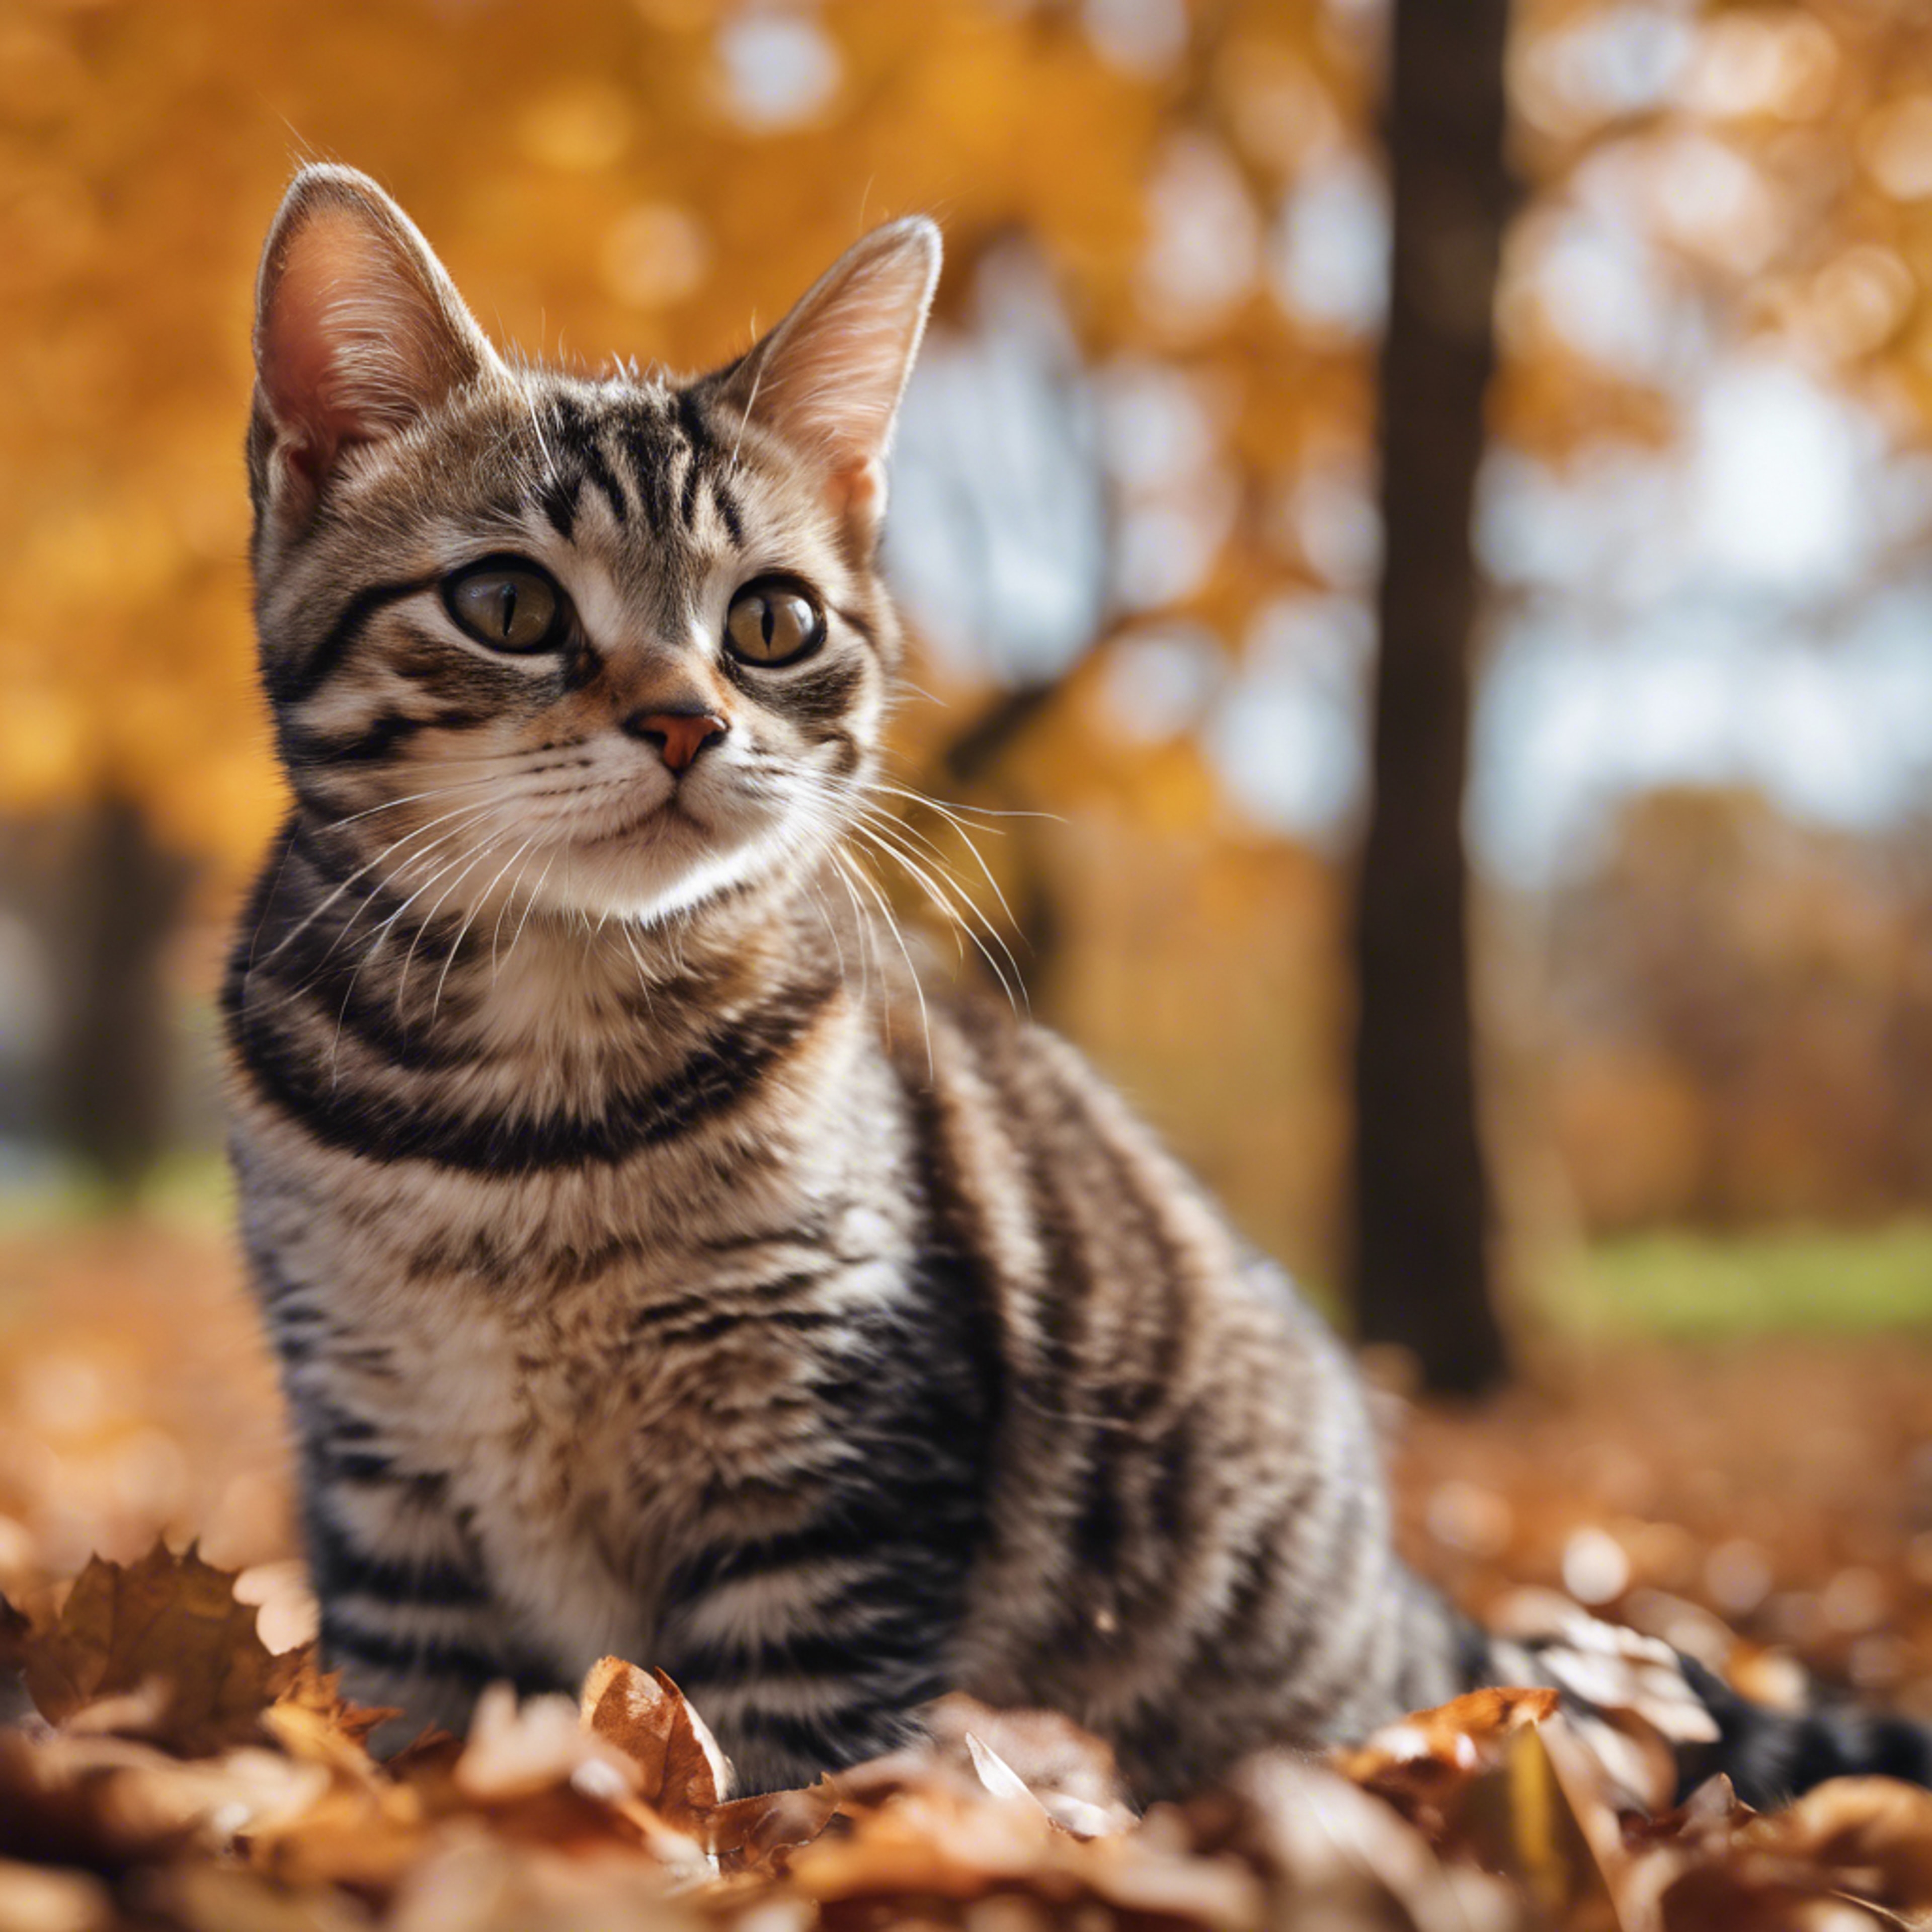 A classic brown tabby American Shorthair kitten lost in her daydreams, busy watching a world full of robust maple trees dancing with autumn winds. Tapeta[94549d28d418408fbb13]